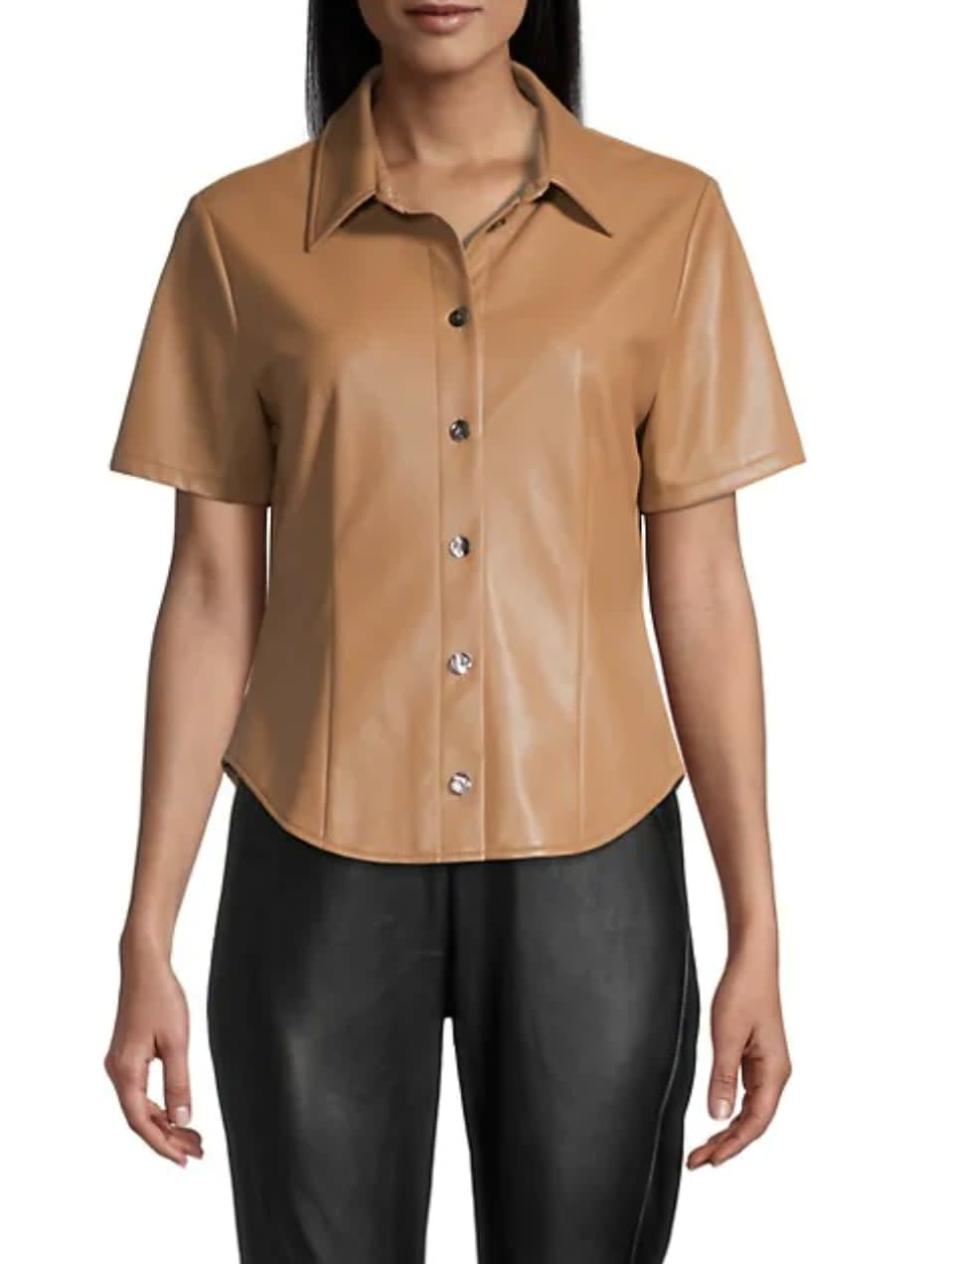 <p>This menswear-inspired <span>Elie Tahari Faux Leather Shirt</span> ($83, originally $185) is easy to pair with your favorite bottoms. We like the colorful leather take on a traditional shirt style.</p>